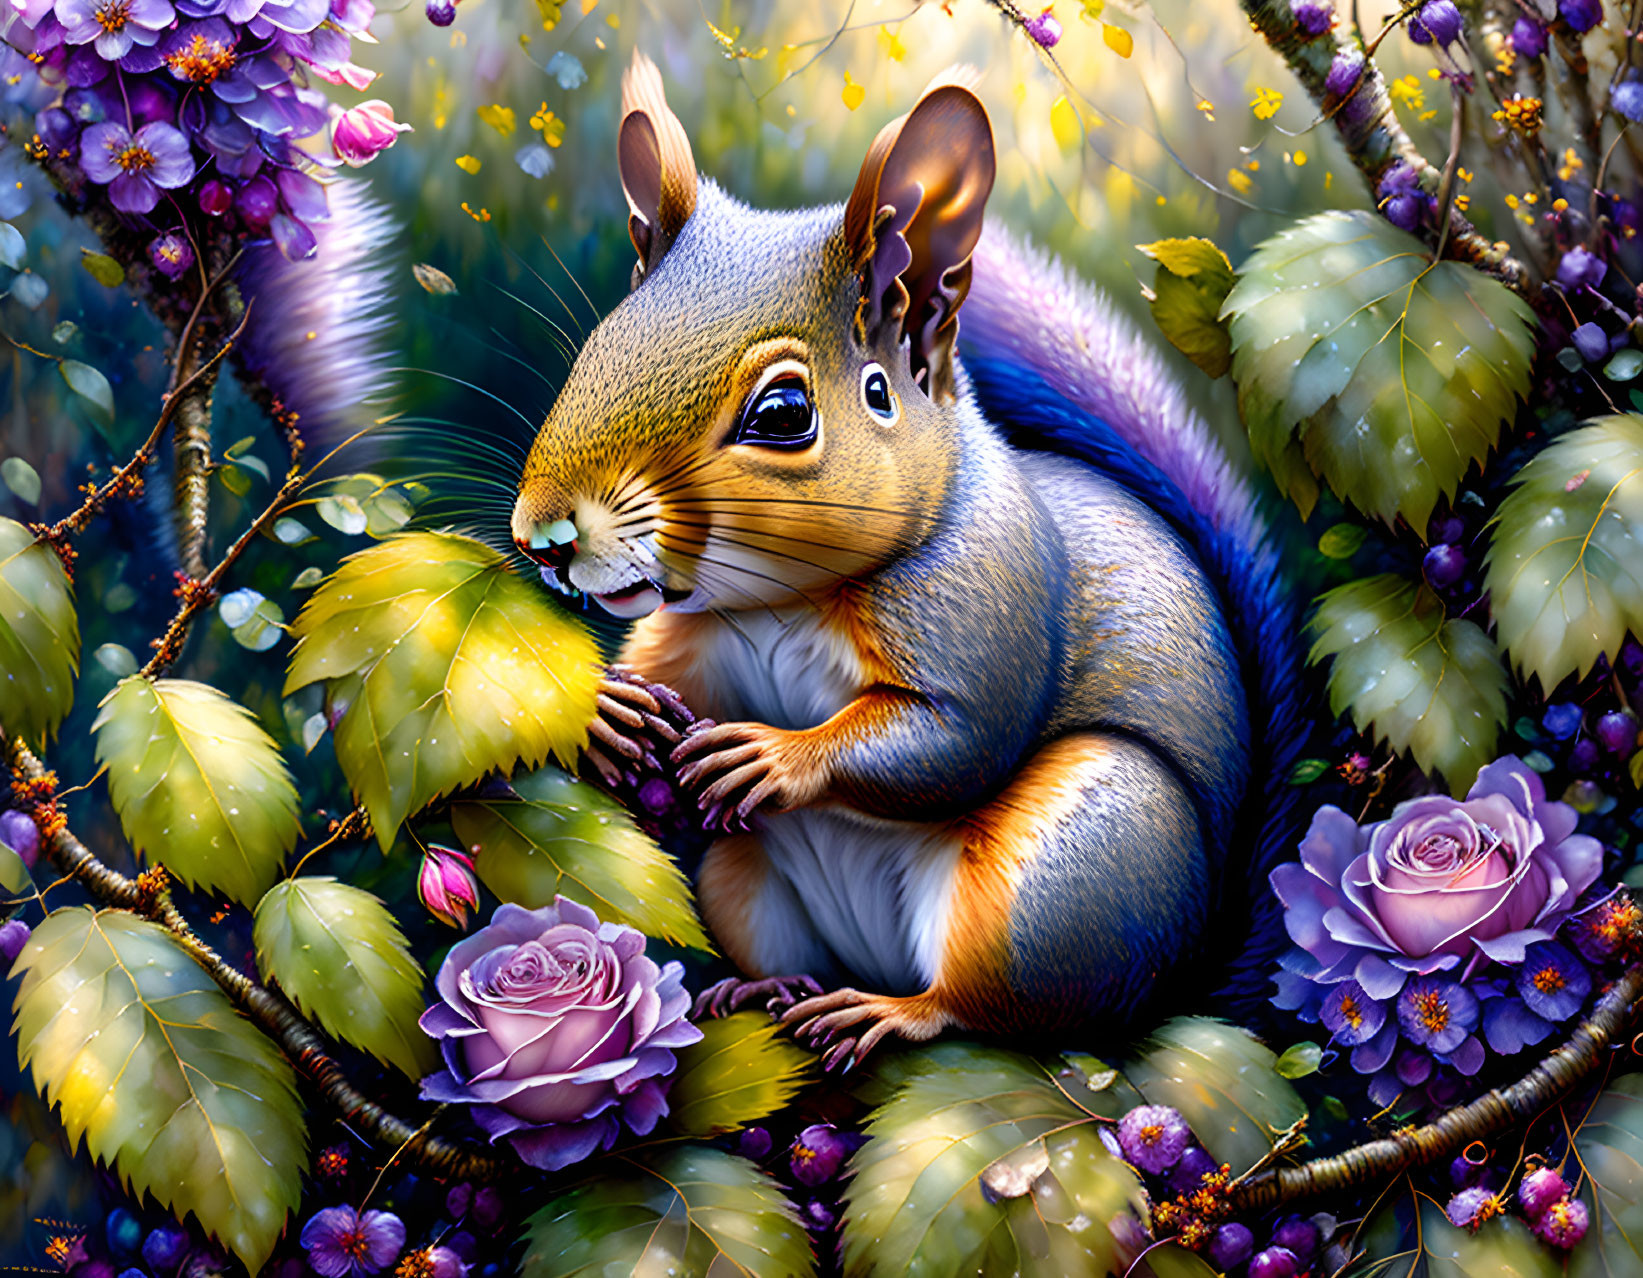 Colorful squirrel illustration in vibrant floral setting